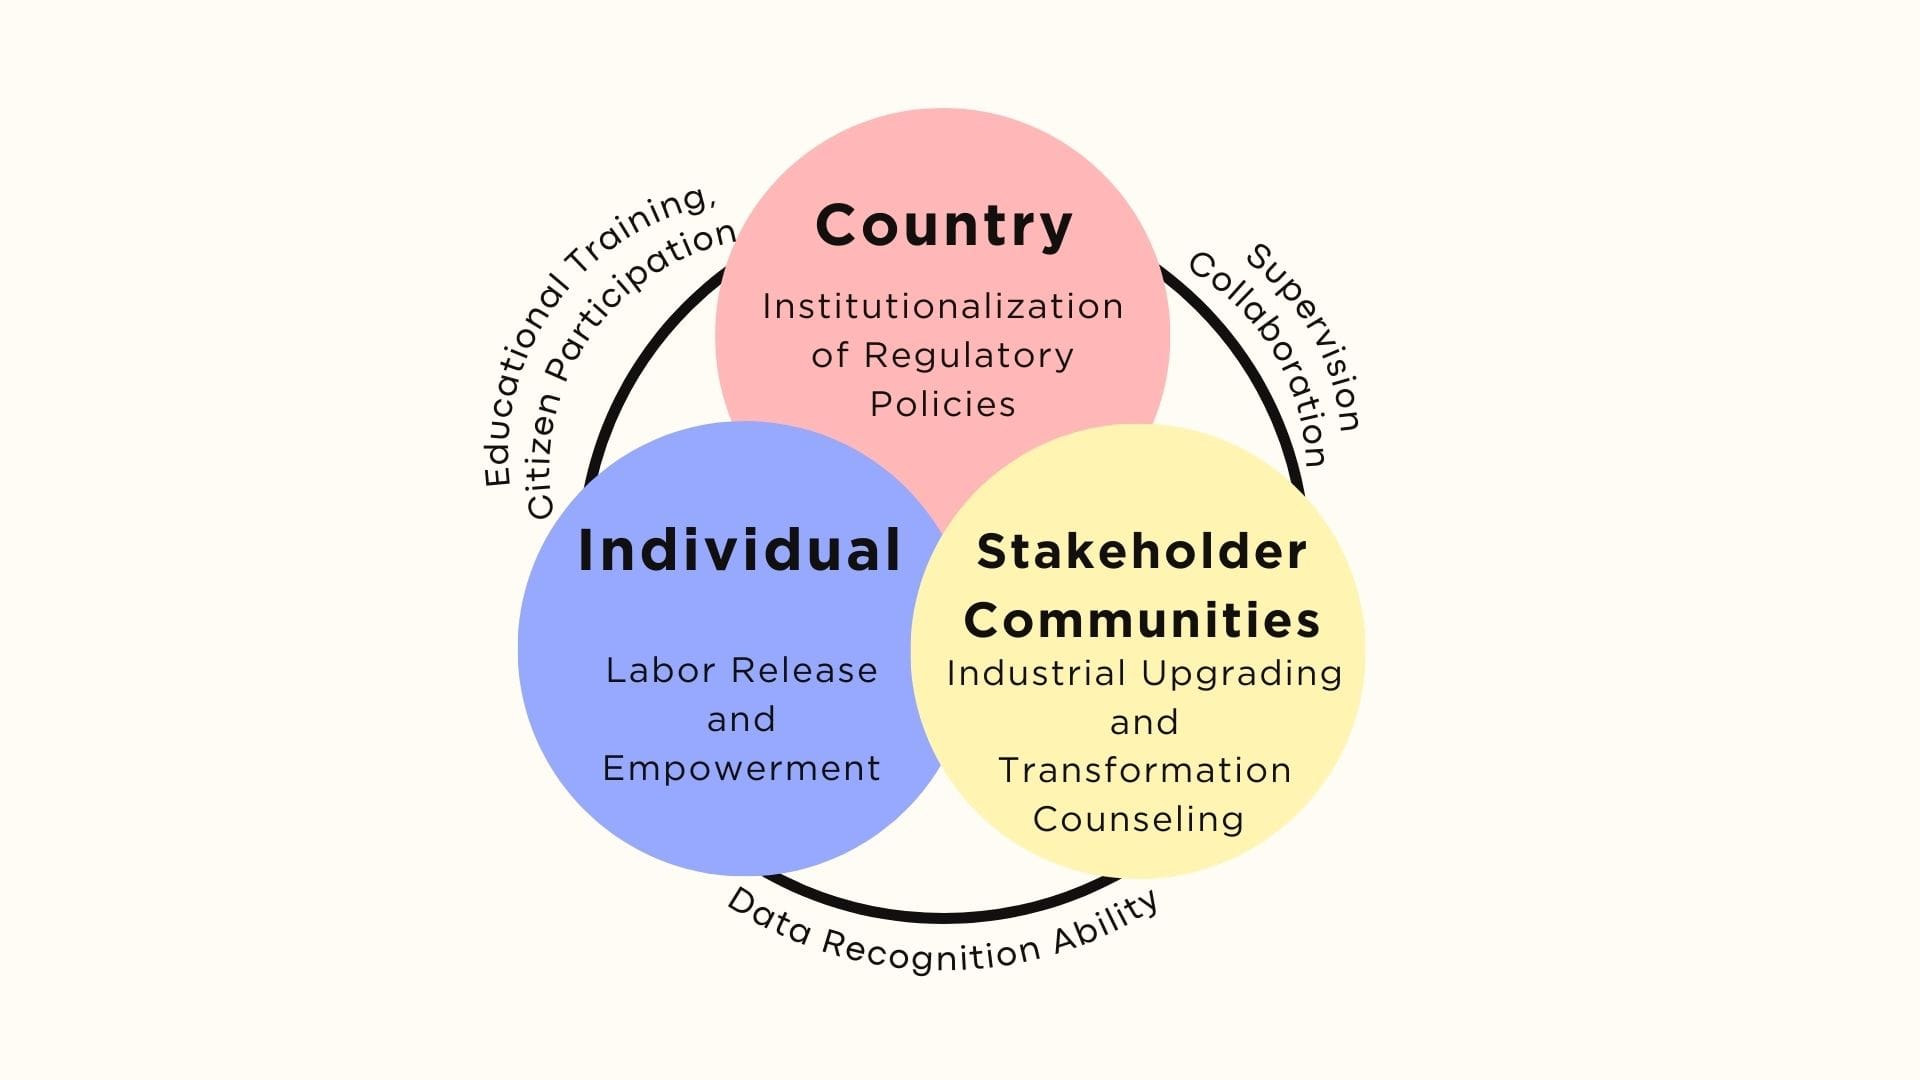 Analyze two civic participation rounds, exploring connections and demands among individuals, stakeholders, and national governance.